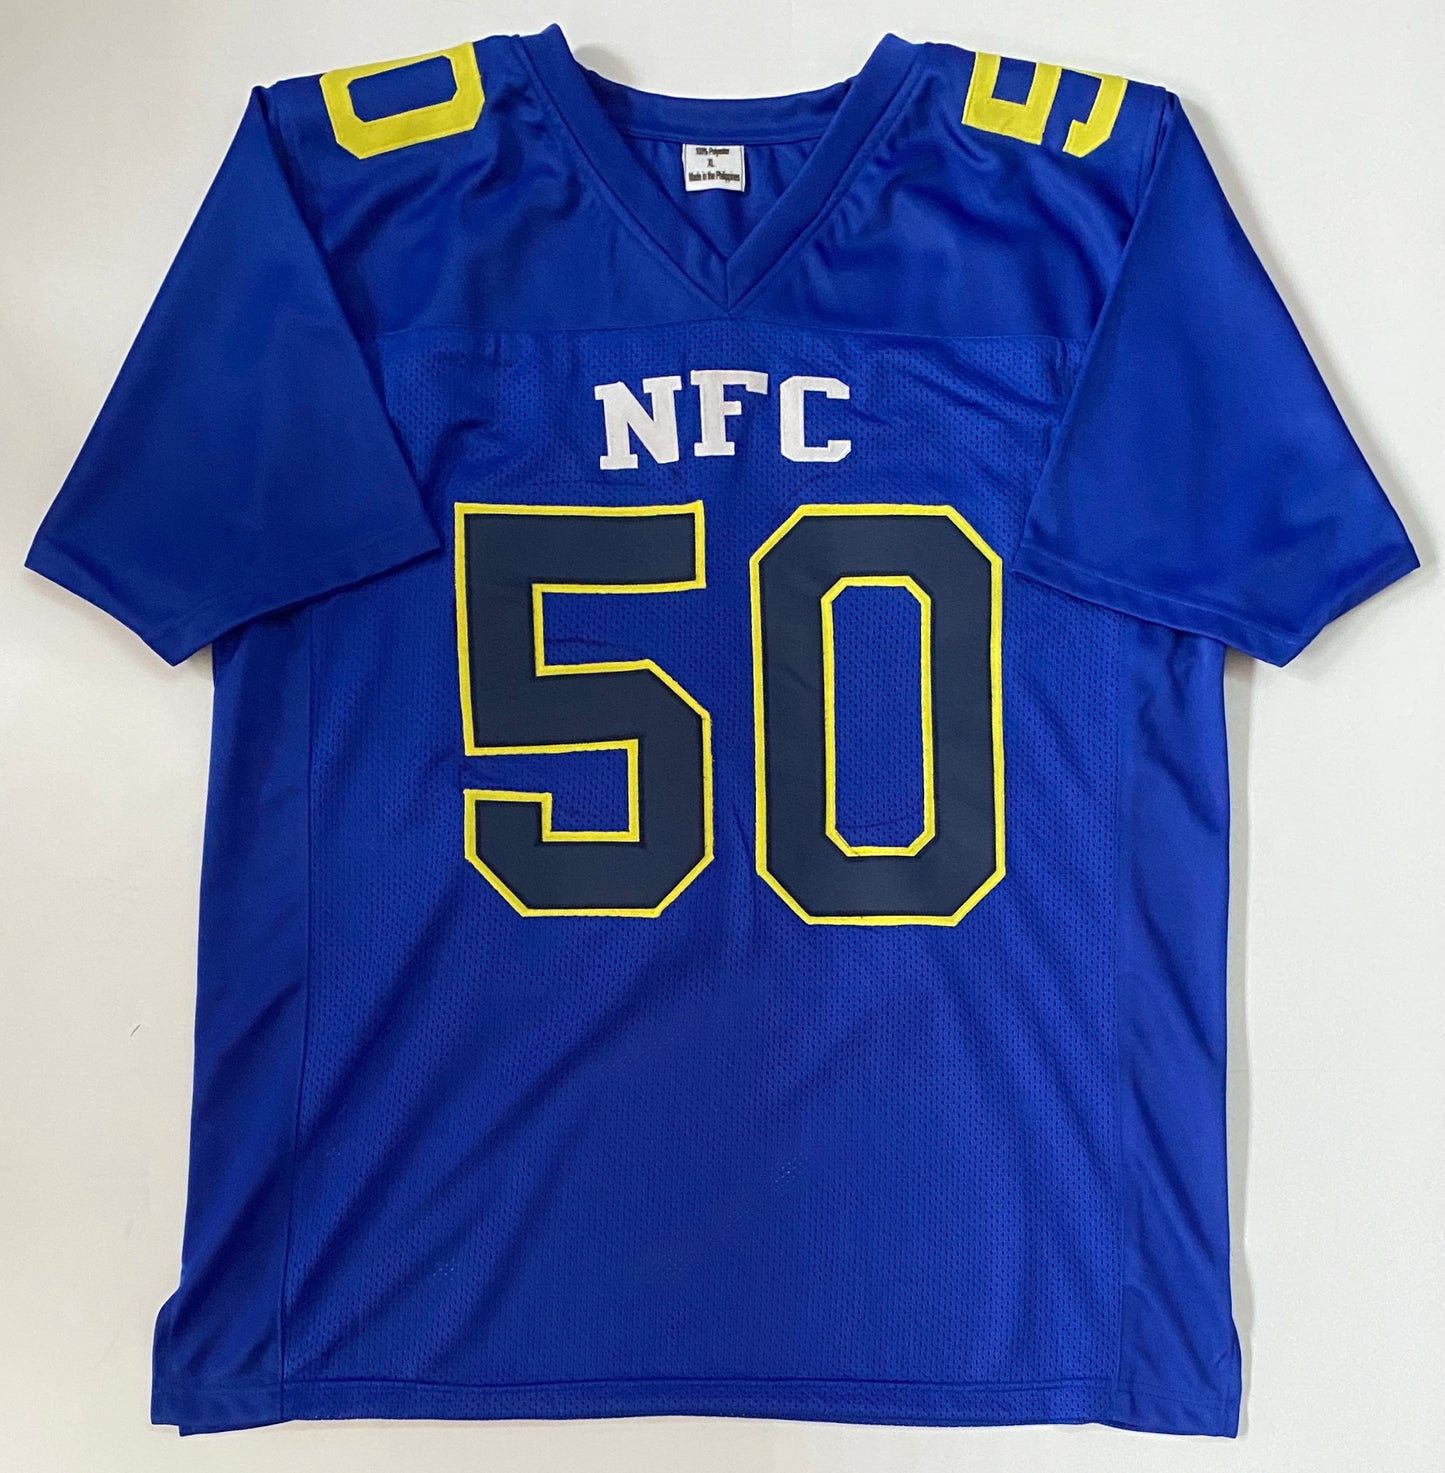 Sean Lee Signed NFC Jersey Inscribed “2017” “Pro Bowl!”